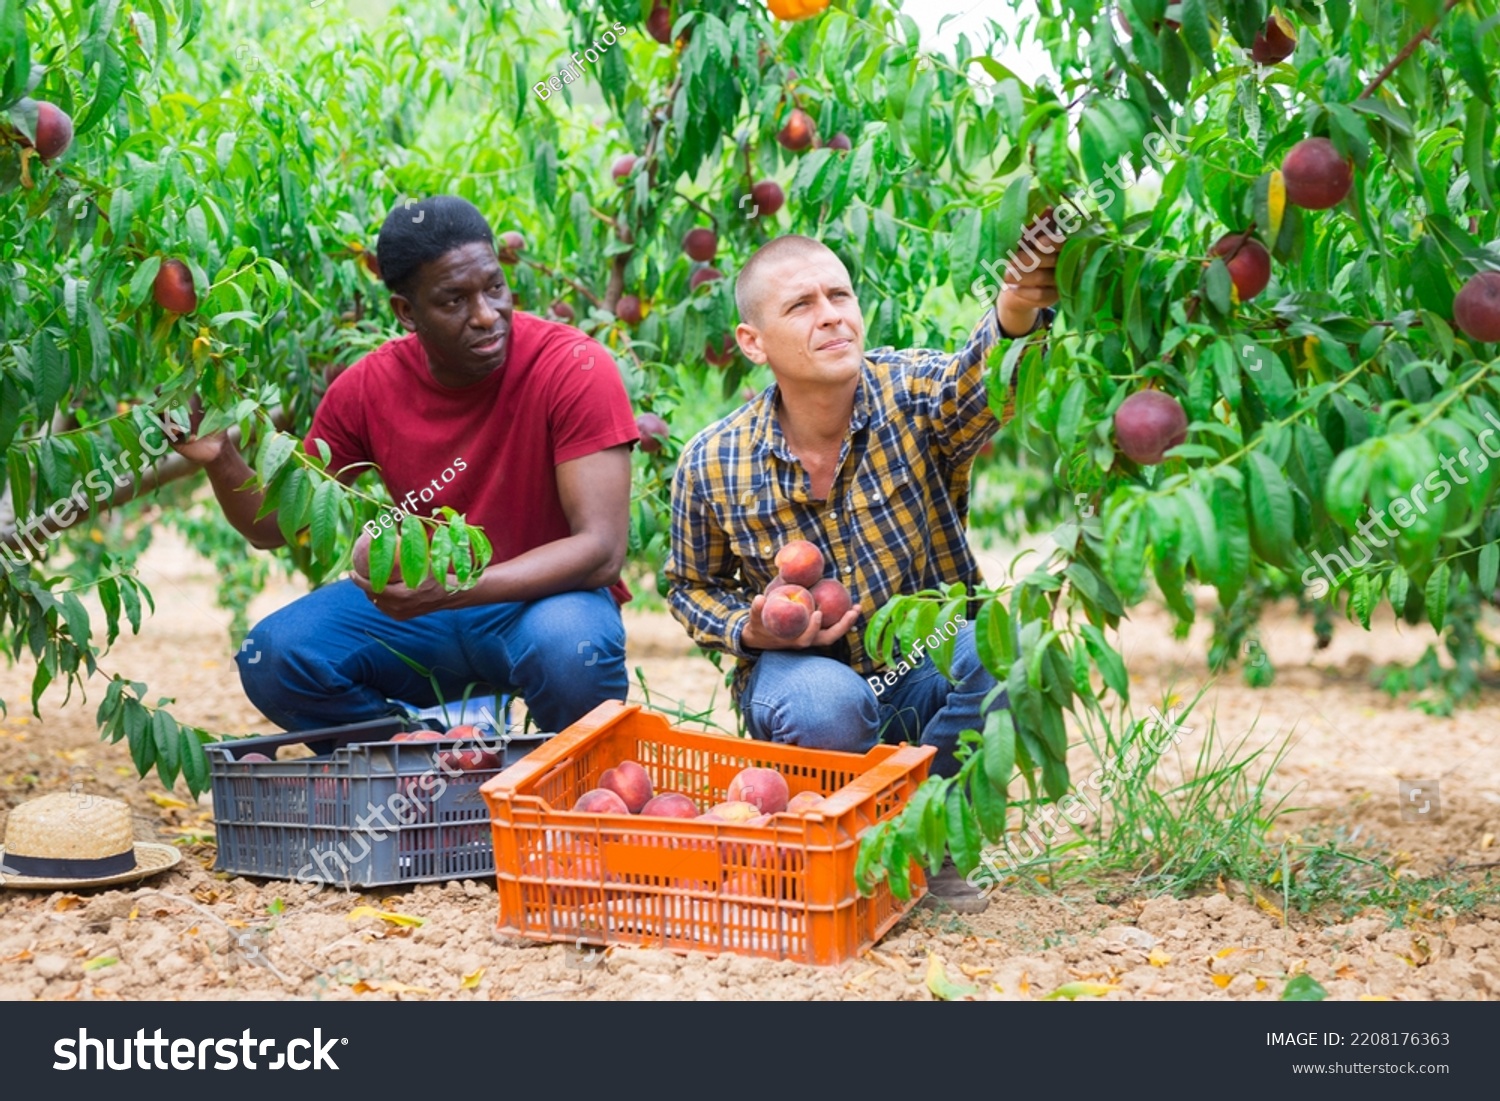 Two workers harvest ripe peaches together in an orchard #2208176363